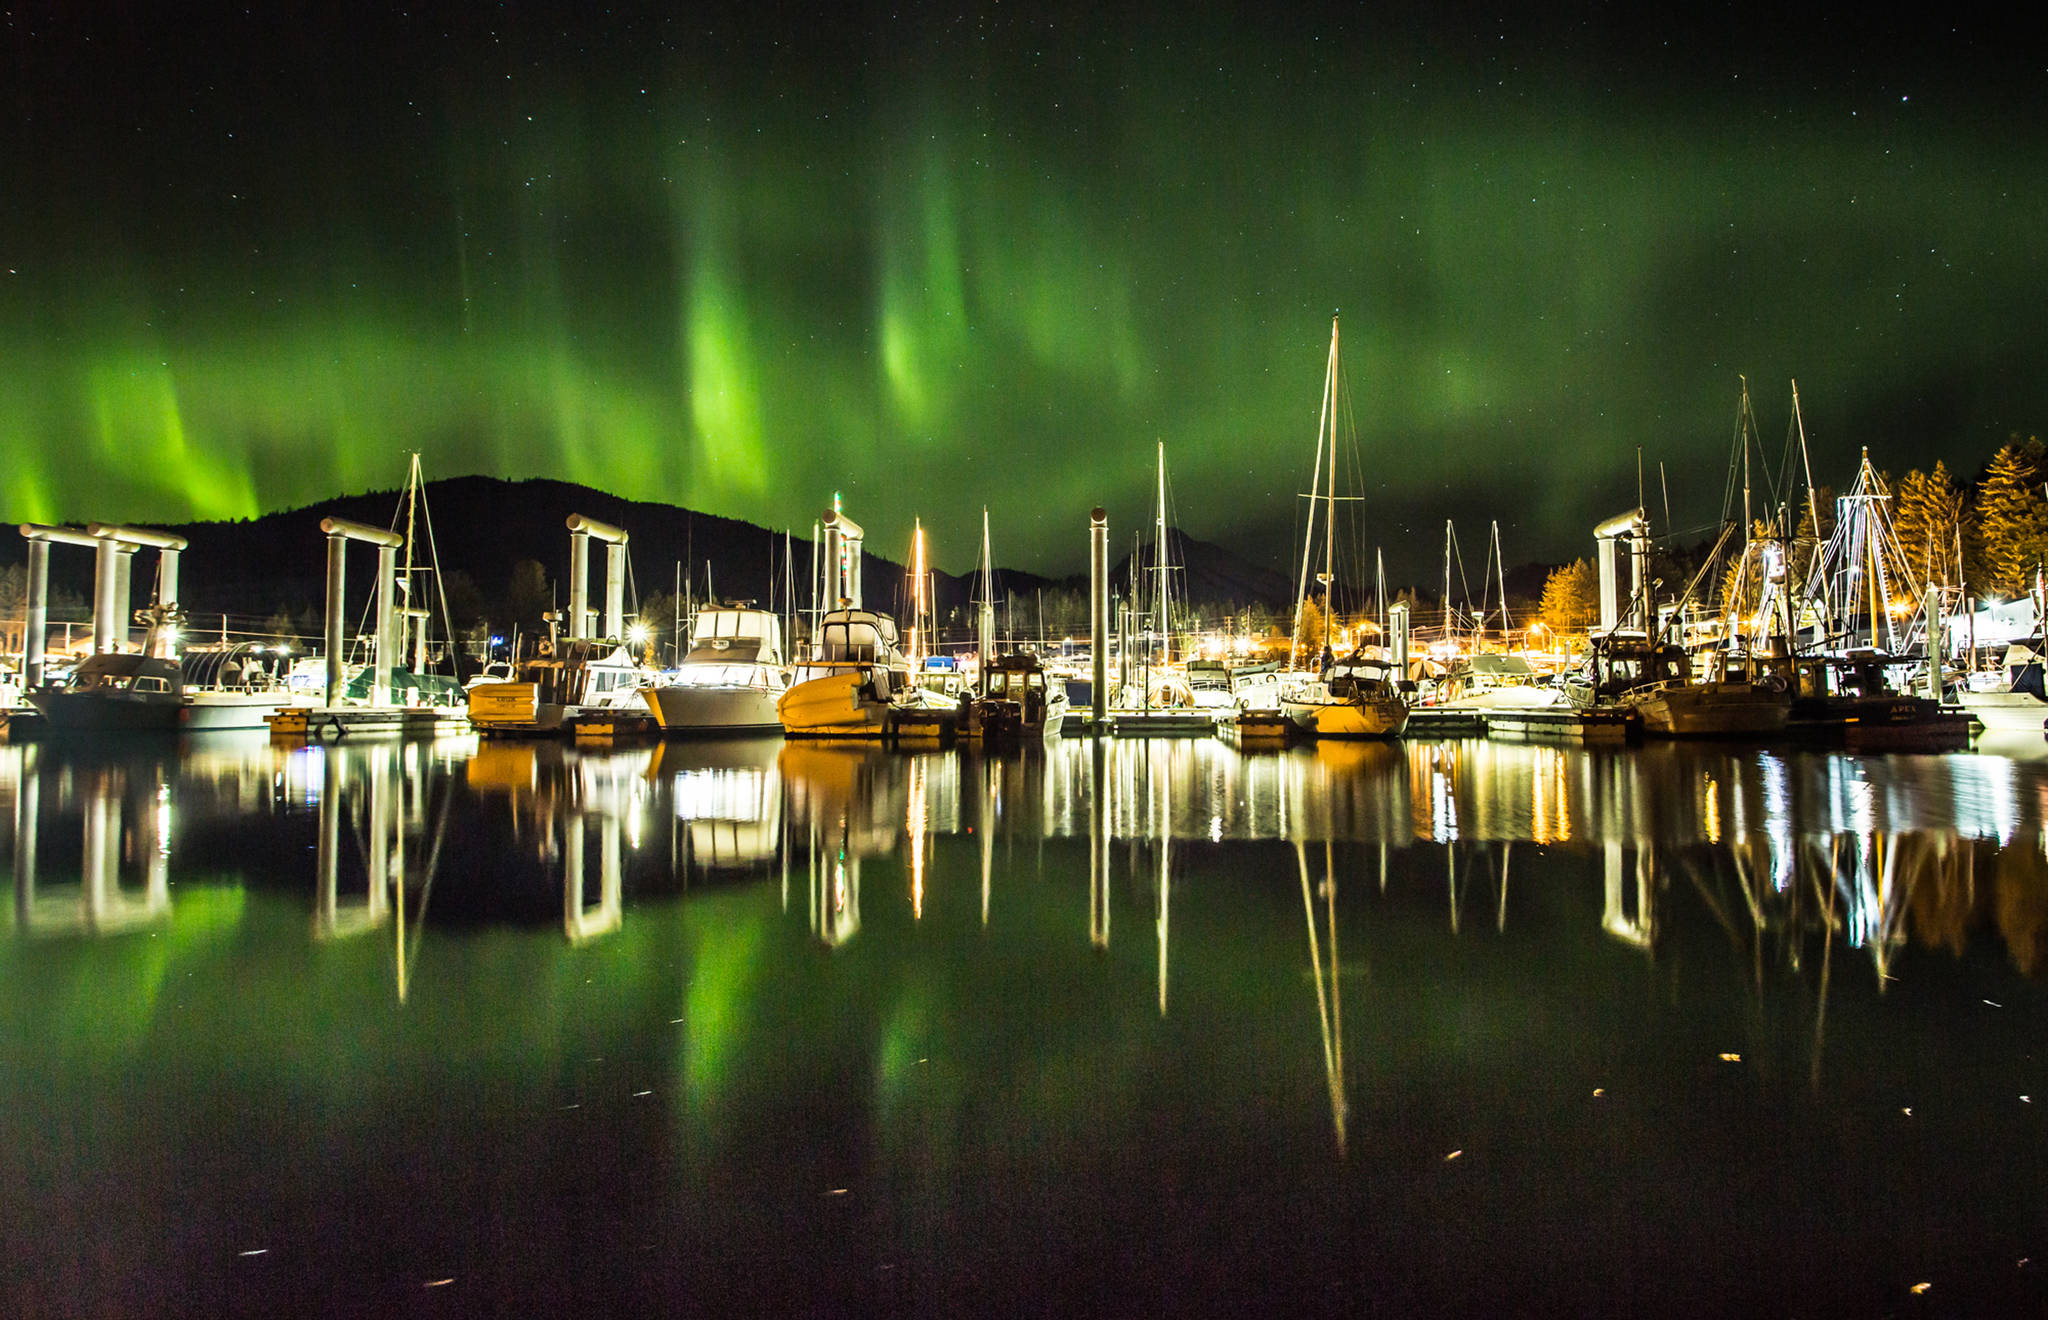 The aurora lights up the night sky over Don D. Statter Memorial Boat Harbor on Feb. 28, 2019. (Courtesy Photo | Jack Beedle)